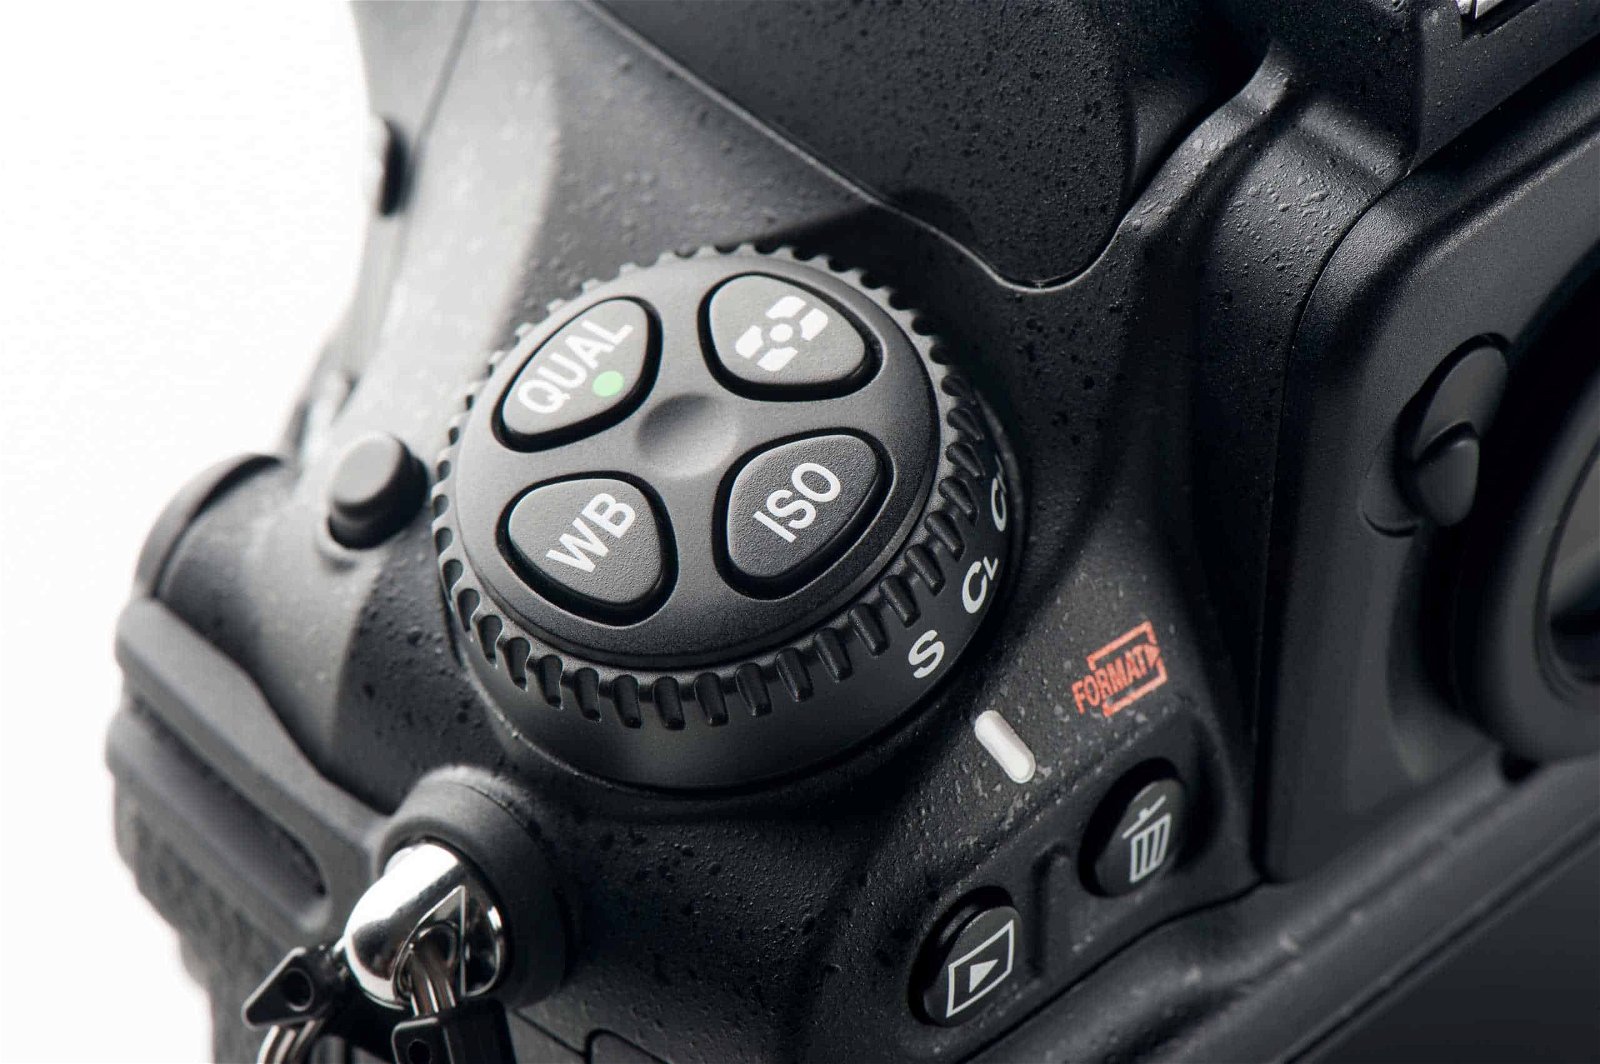 camera image focusing on the ISO function button